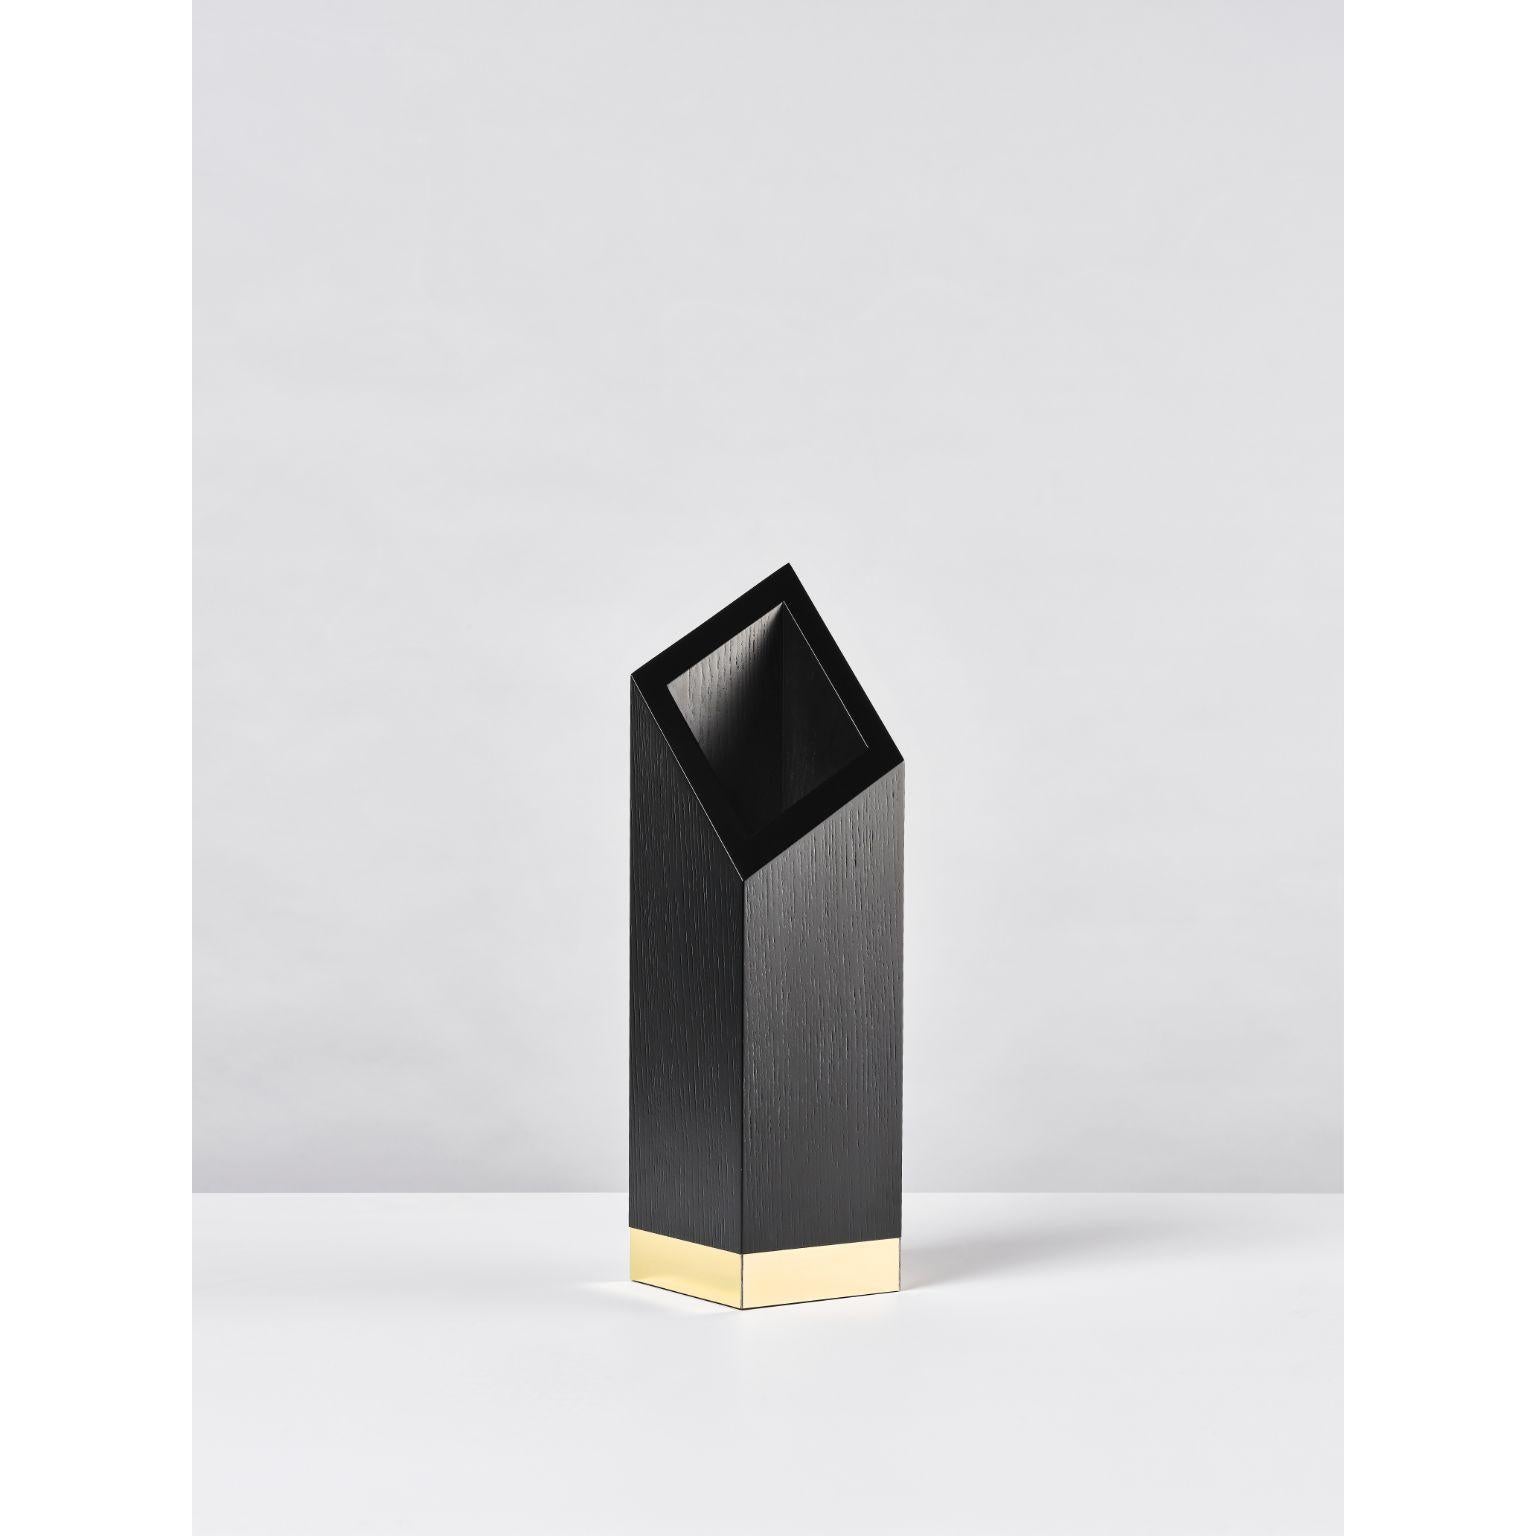 Babel vase sculpted by Lupo Horio¯kami
Dimensions: D 15 x W 15 x H 55 cm
Materials: Black ashwood, gold metallic foil

“The artwork [...] arises when the mind is willing to accept reality as it was the first time it meets it” (“aesthetics of the